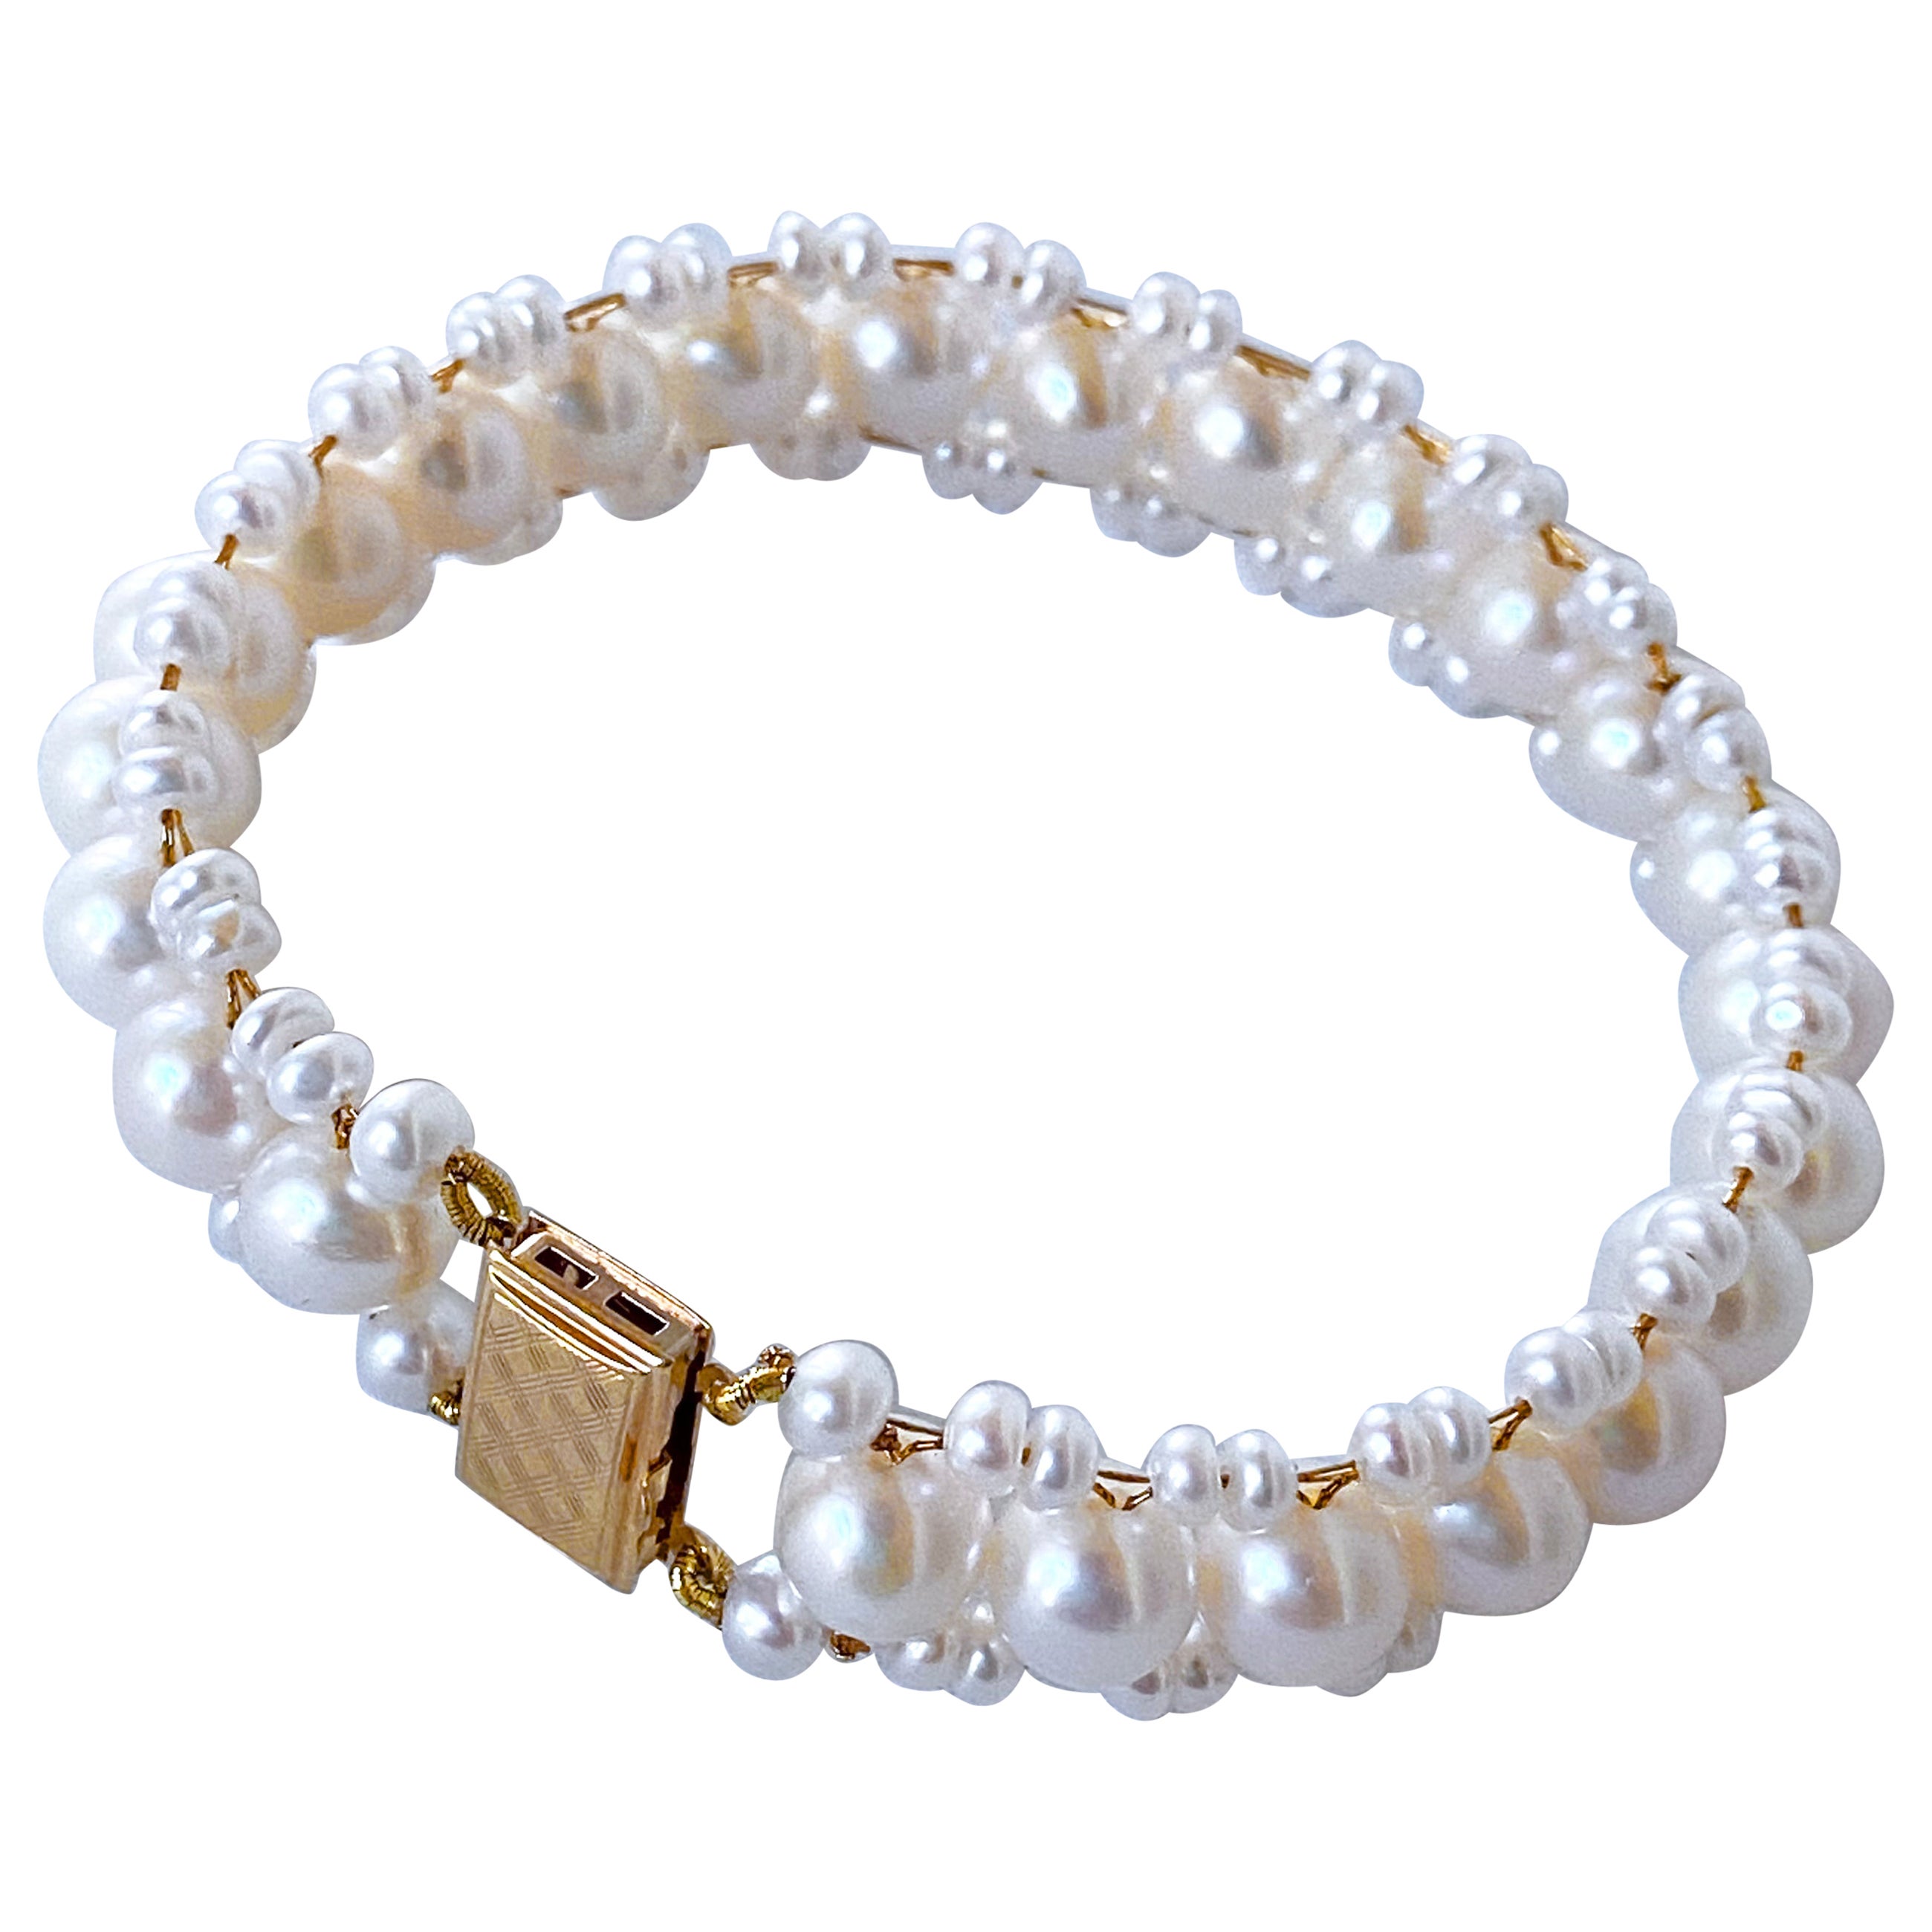 Marina J. Pearl Woven Bracelet with solid 14k Yellow Gold Clasp